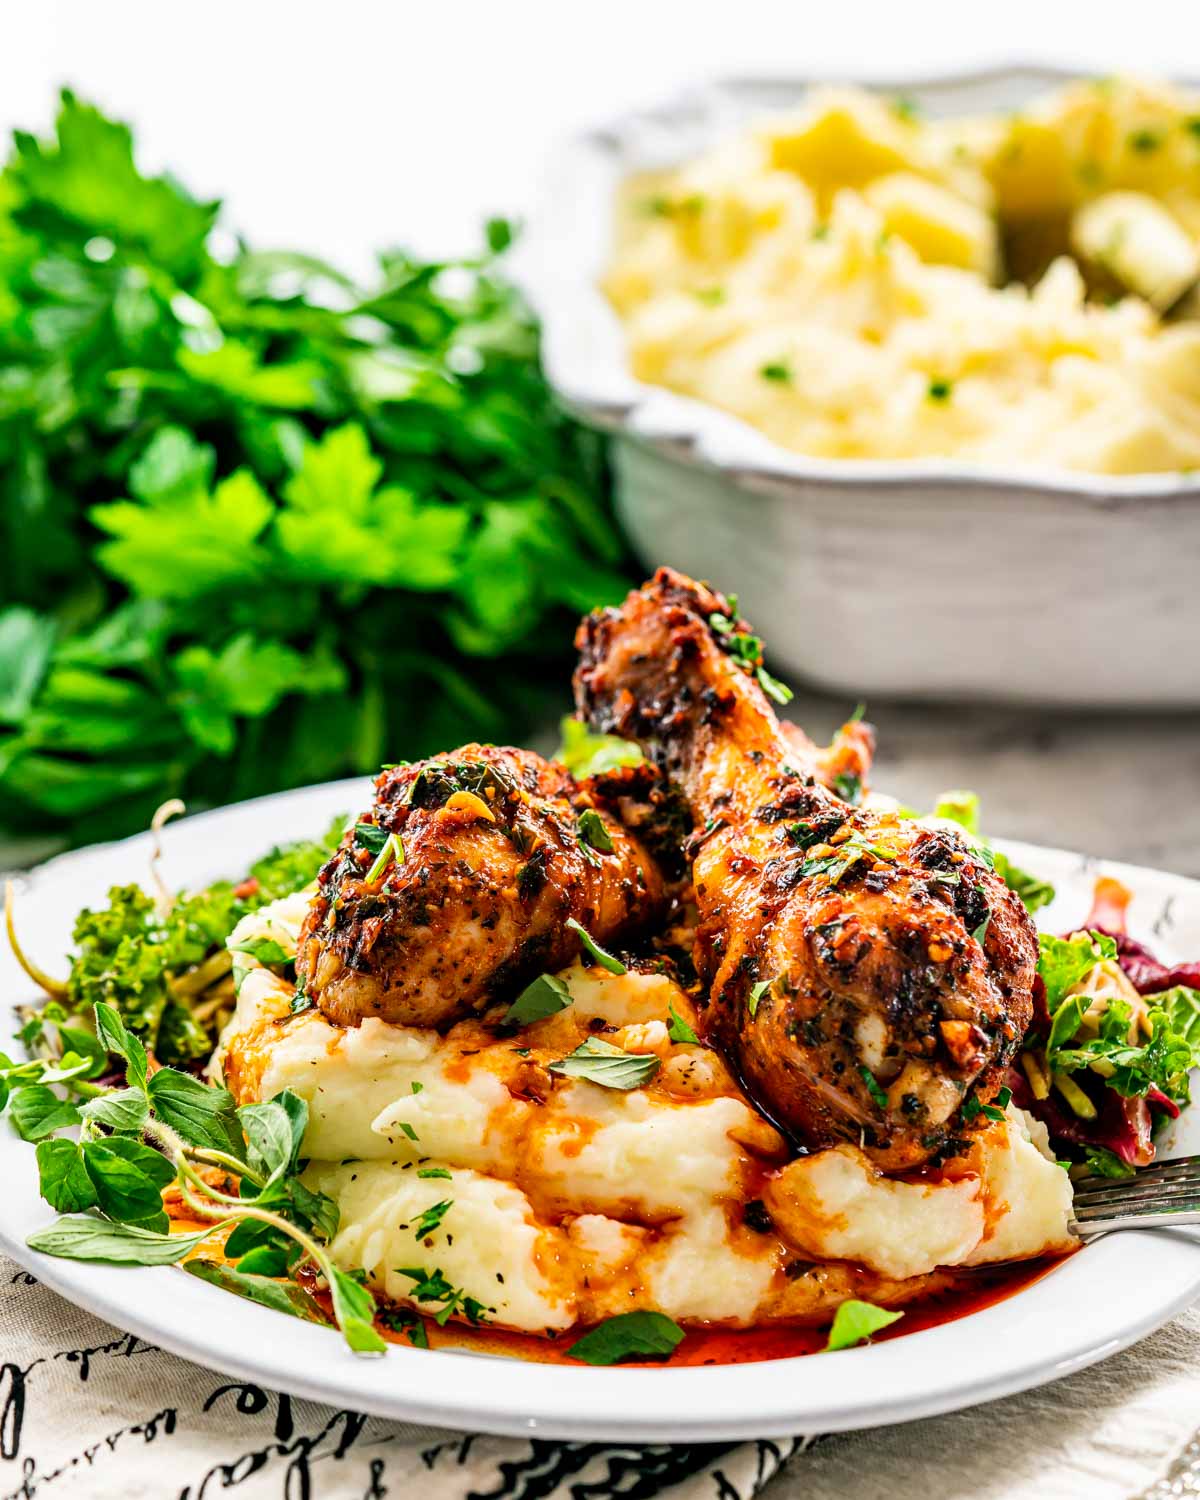 garlic paprika chicken drumsticks on a bed of mashed potatoes.